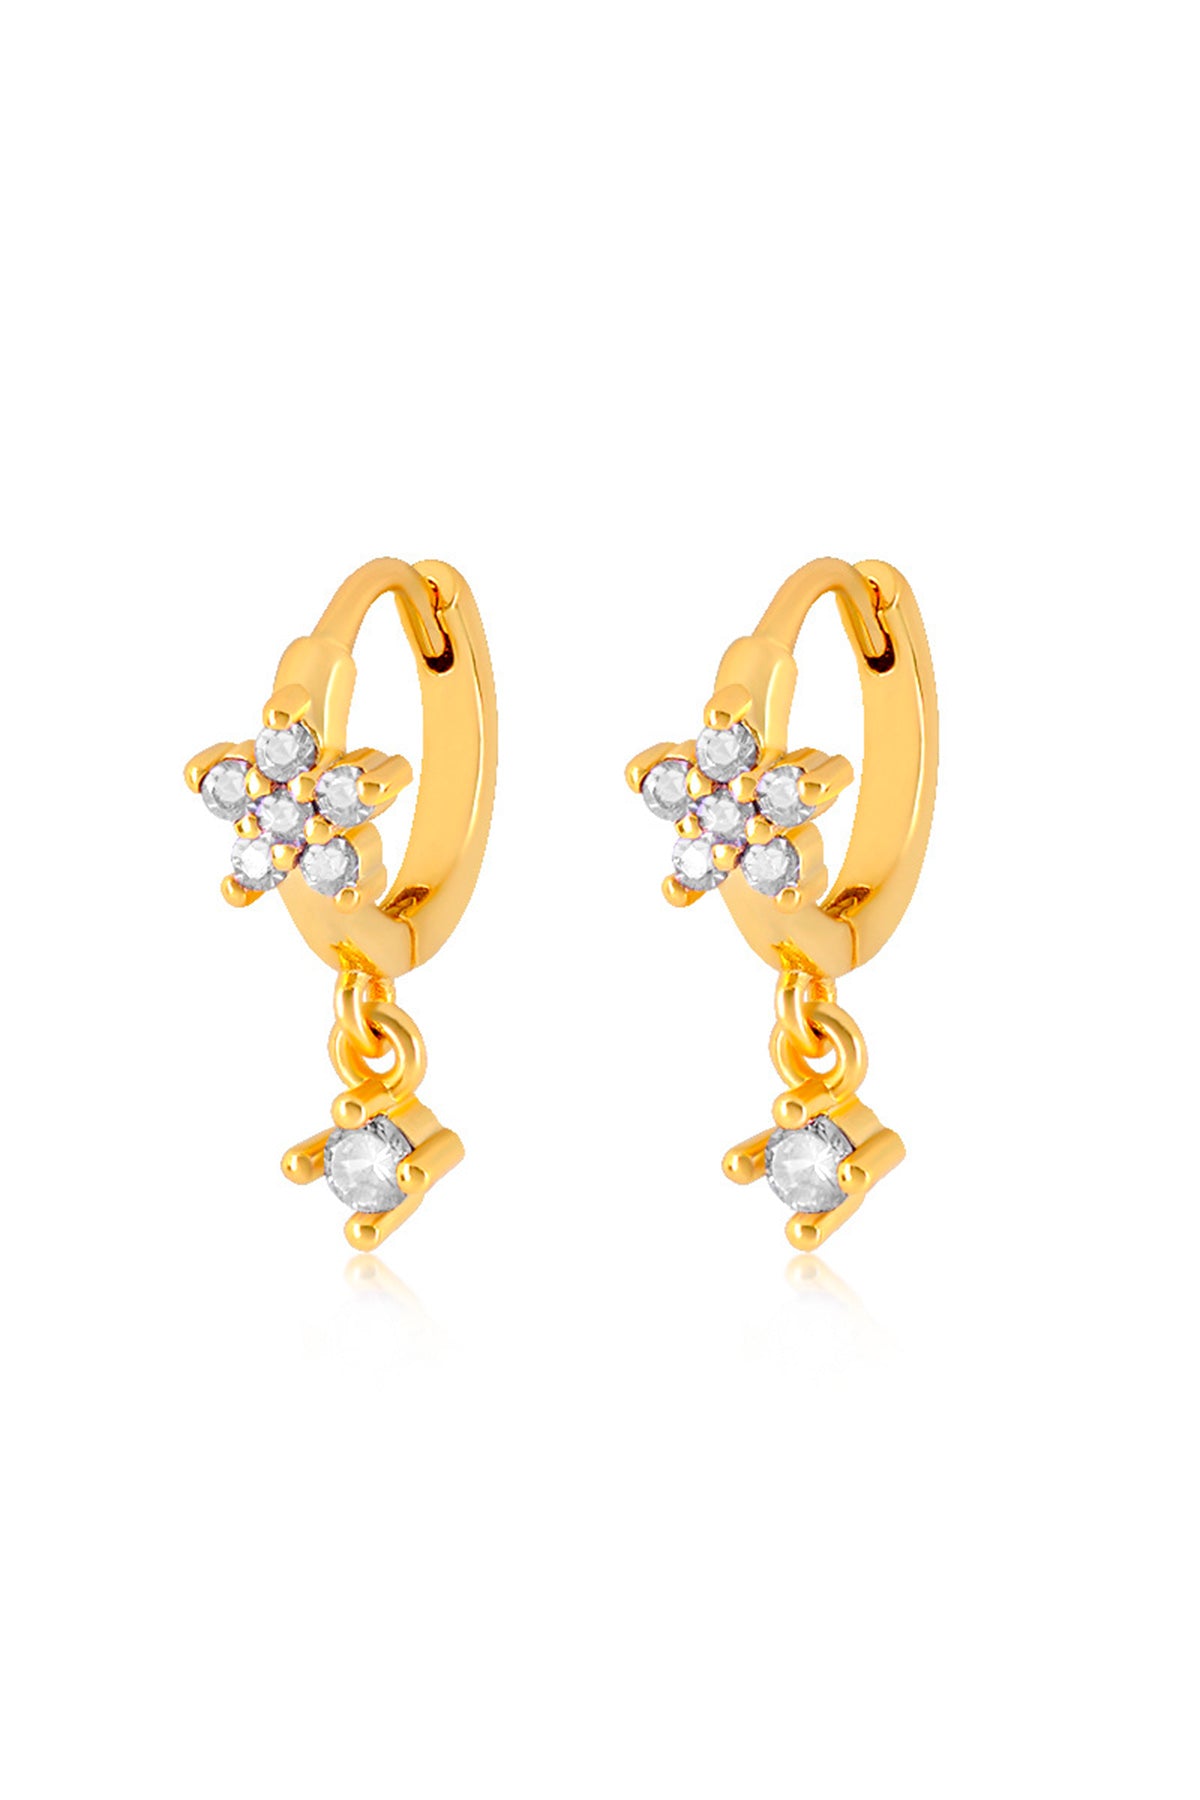 CRAS Jewellery BrightonCras Earring Jewellery 18K Gold Plated Crystal CZ